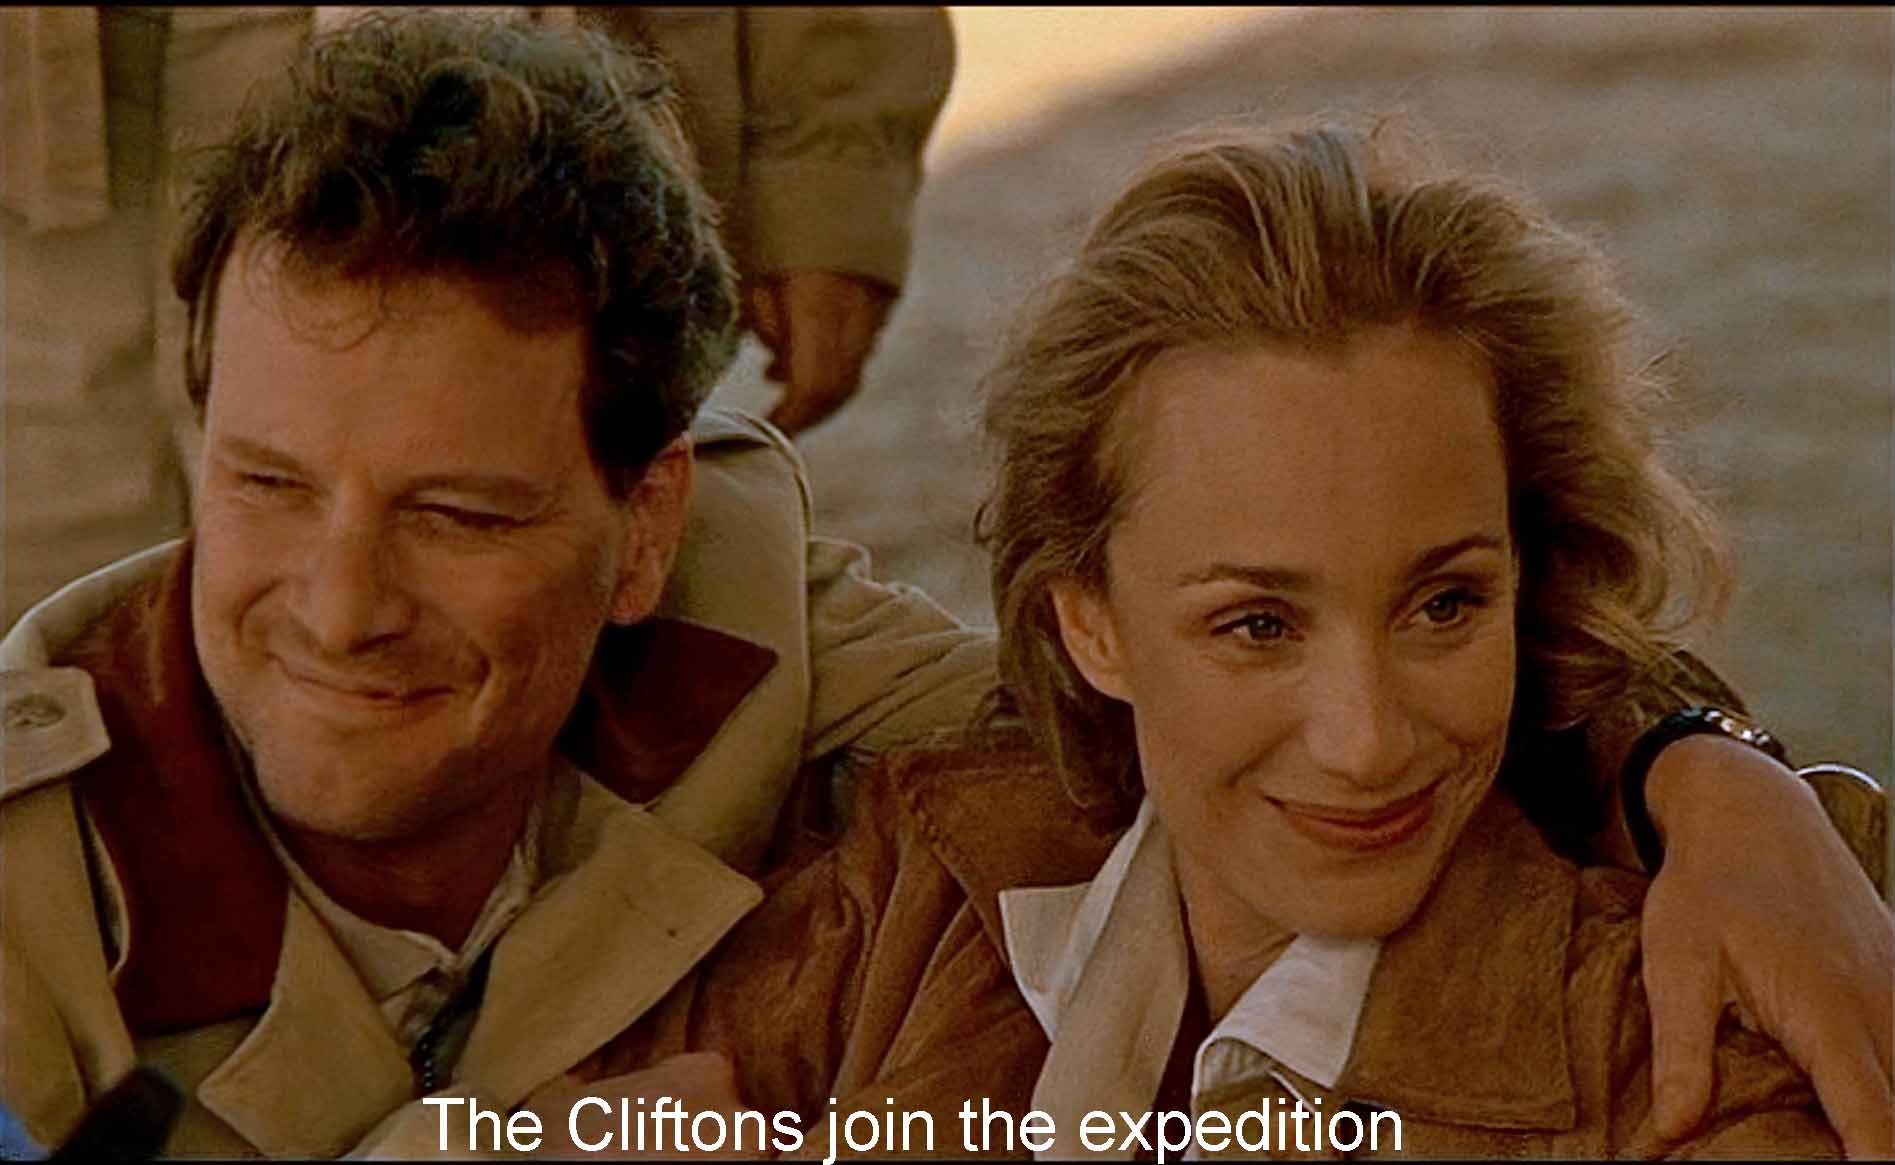 The Cliftons join the expedition